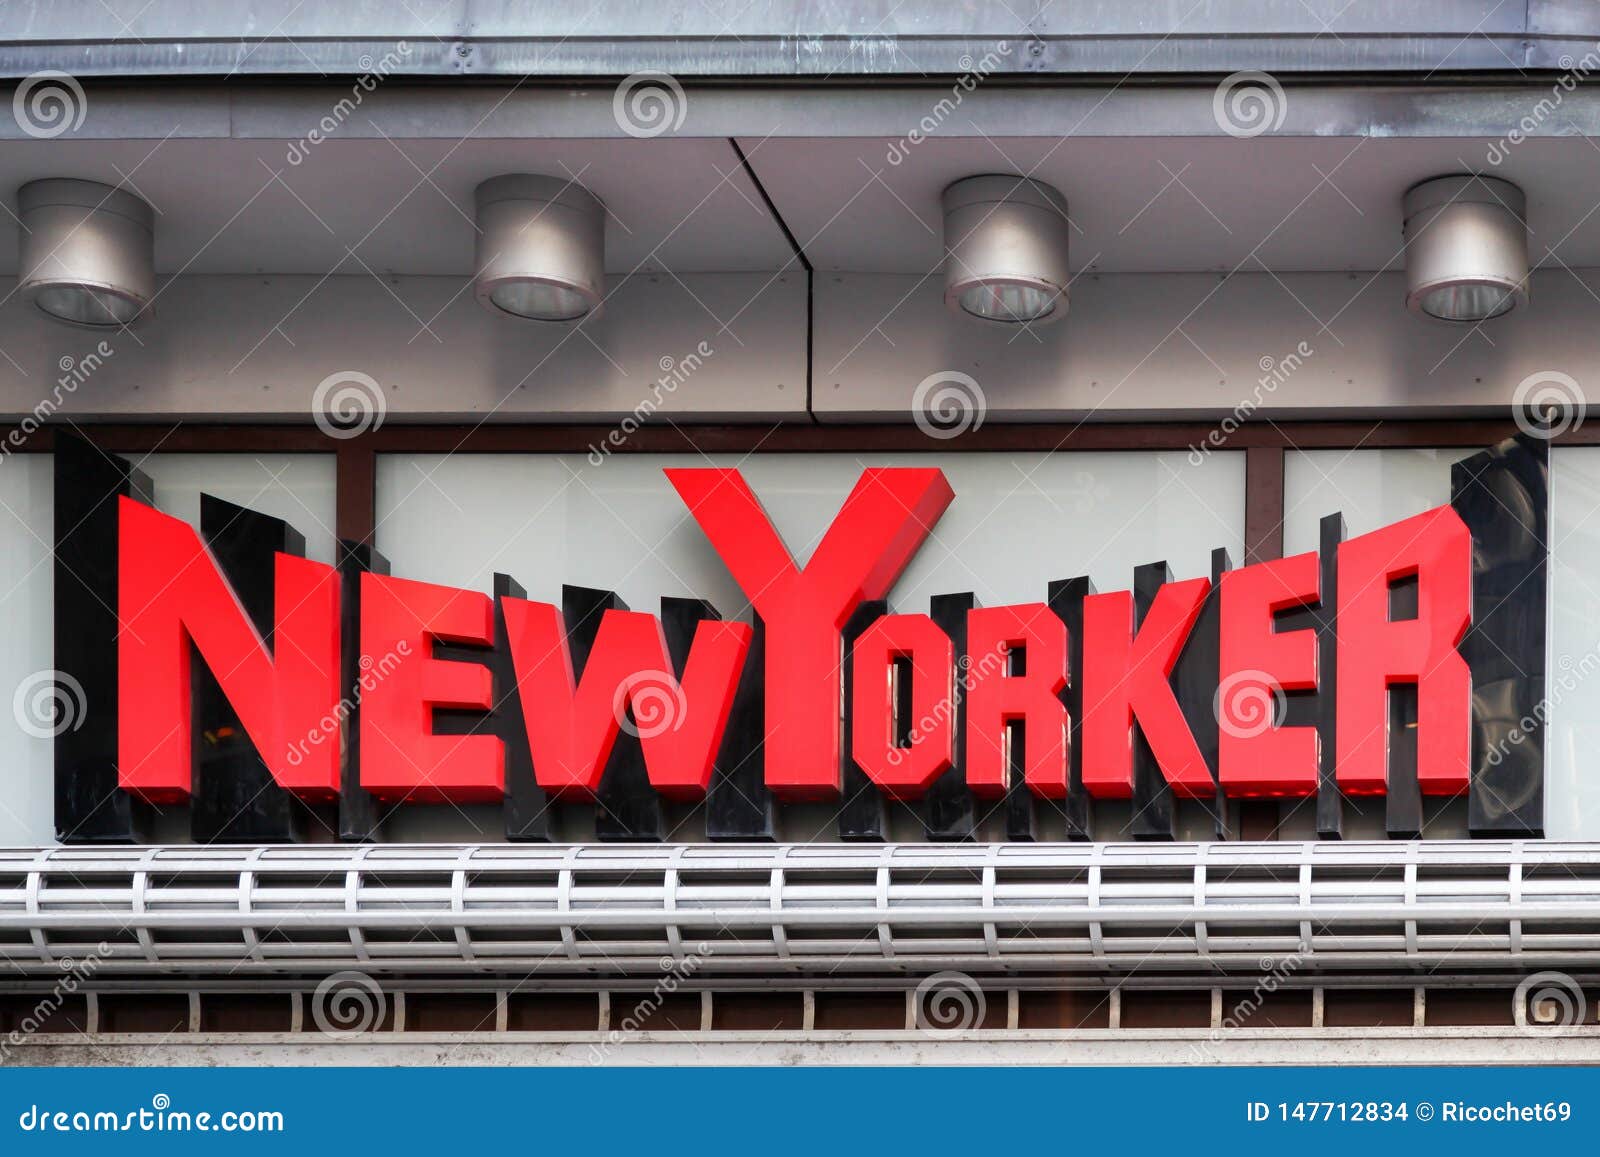 New Yorker Logo On A Wall Editorial Stock Image Image Of Chain 147712834